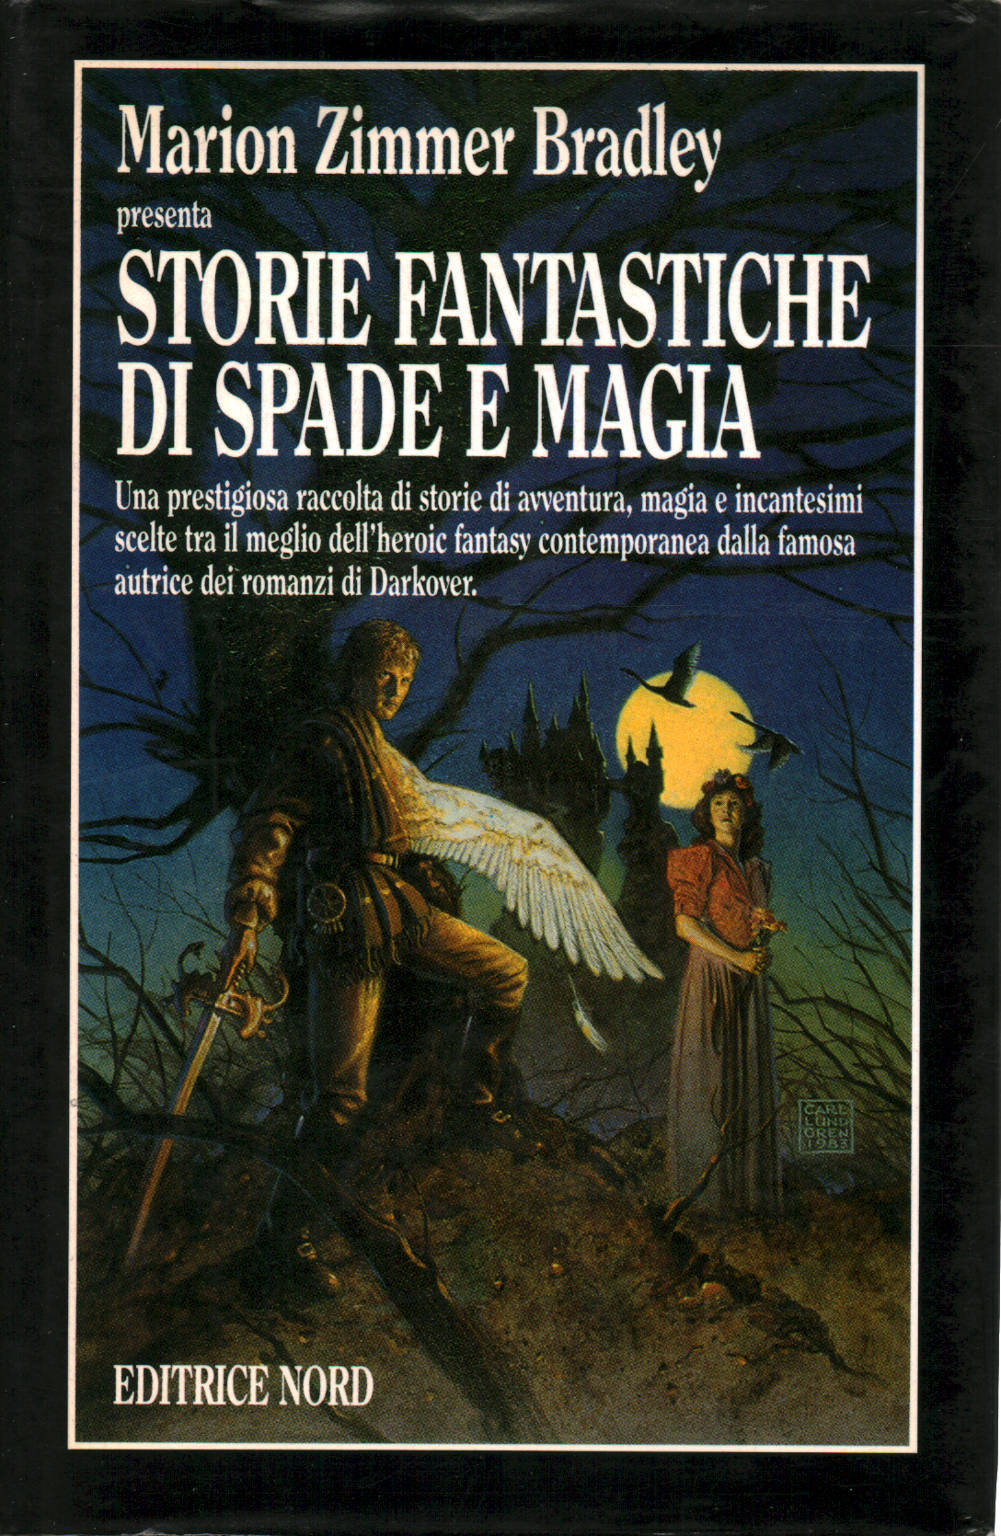 Fantastic Tales of Swords and Magic, Marion Zimmer Bradley